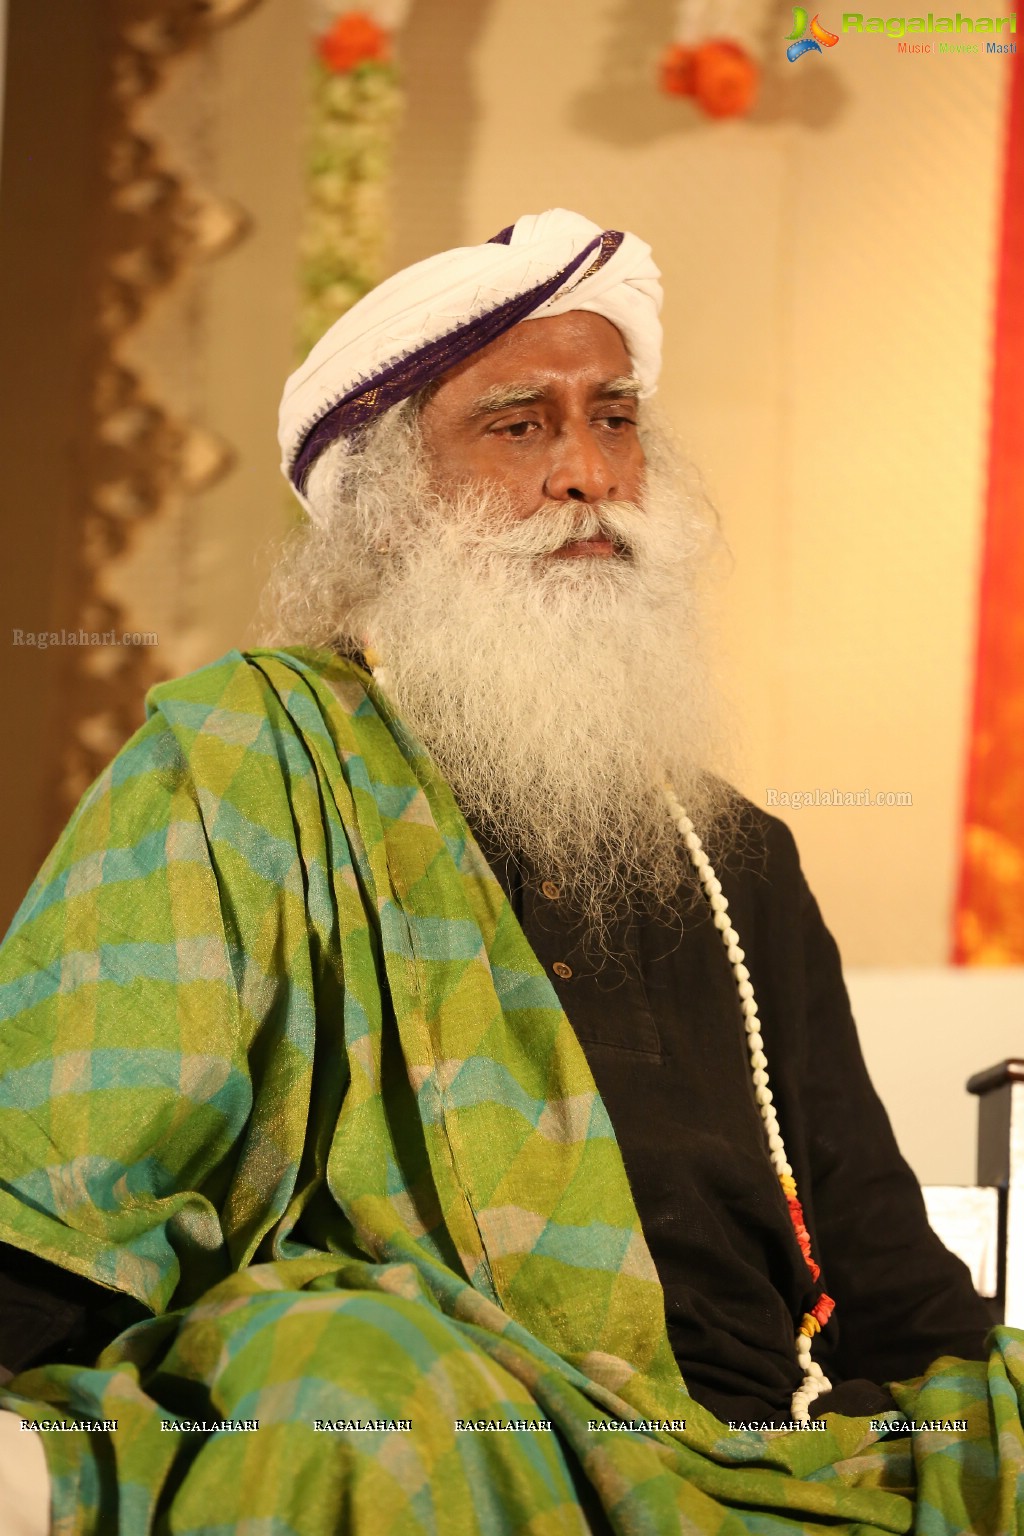 FICCI FLO Hyderabad Chapter Interactive Session with The Mystic Sadhguru, The Park